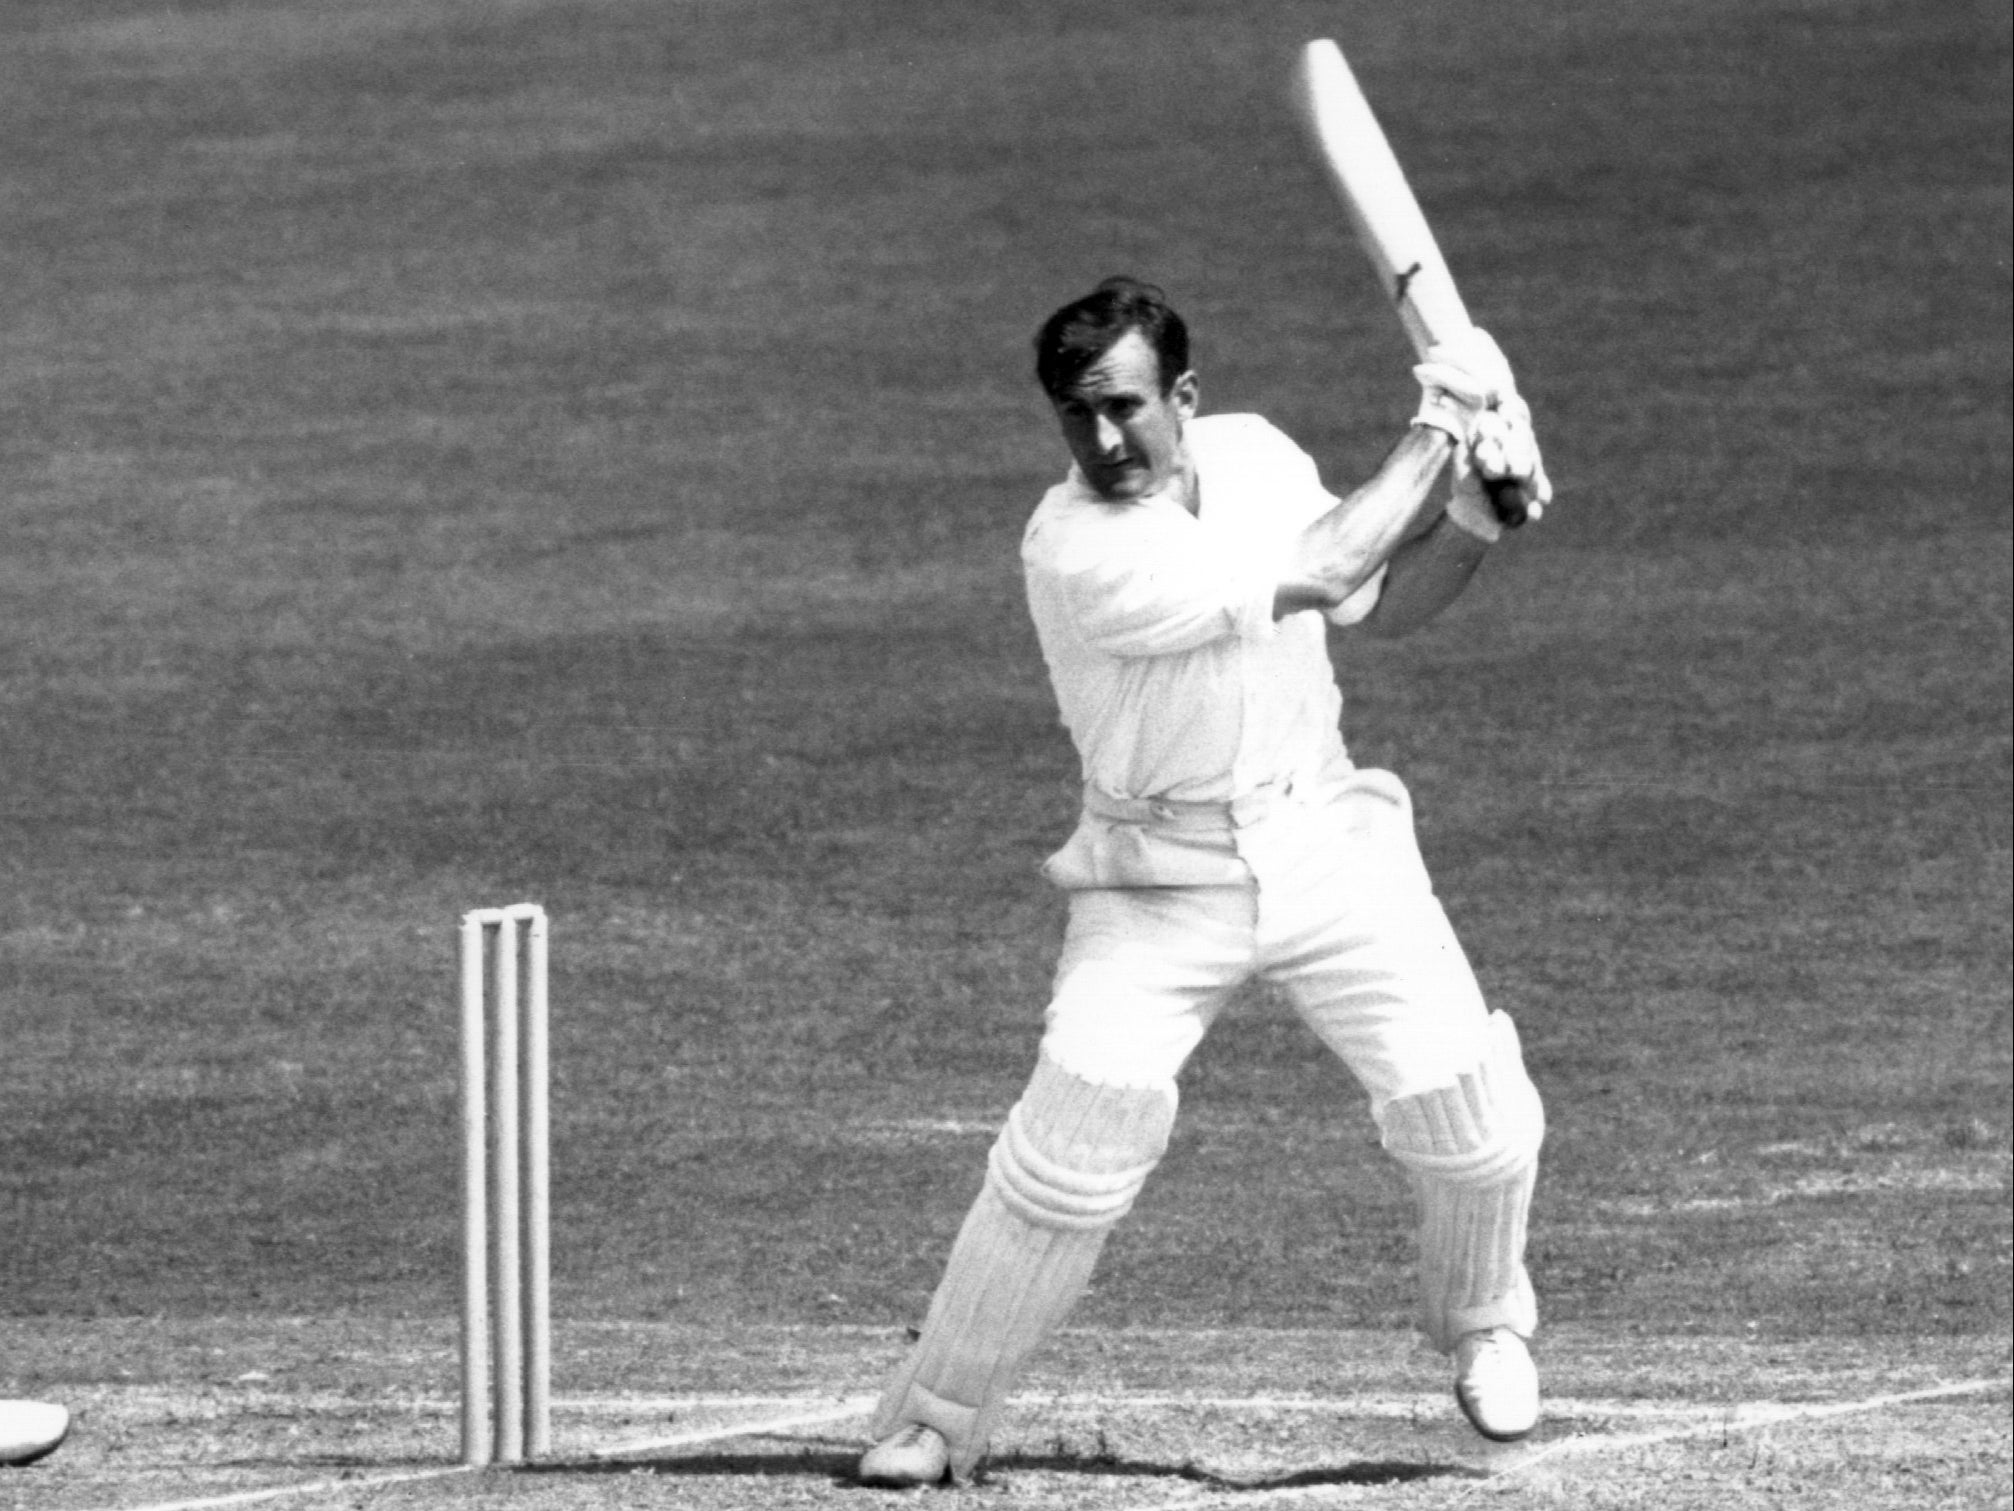 Ted Dexter batting against Australia at Hove in1964